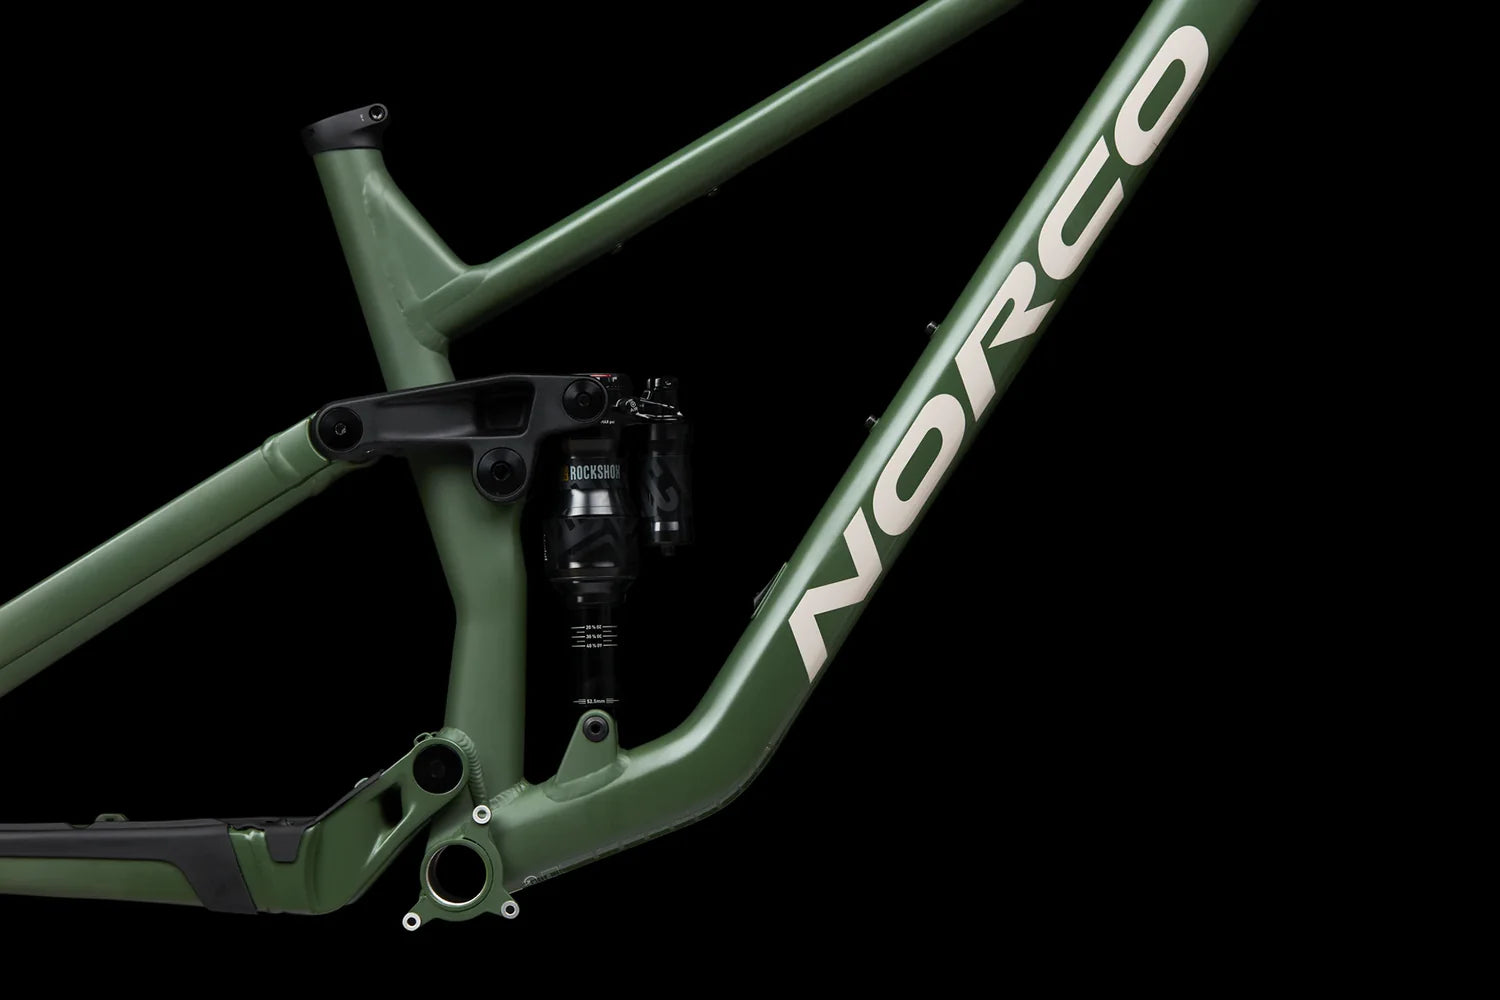 Norco SIGHT A FRKIT Green/Grey Cuadro